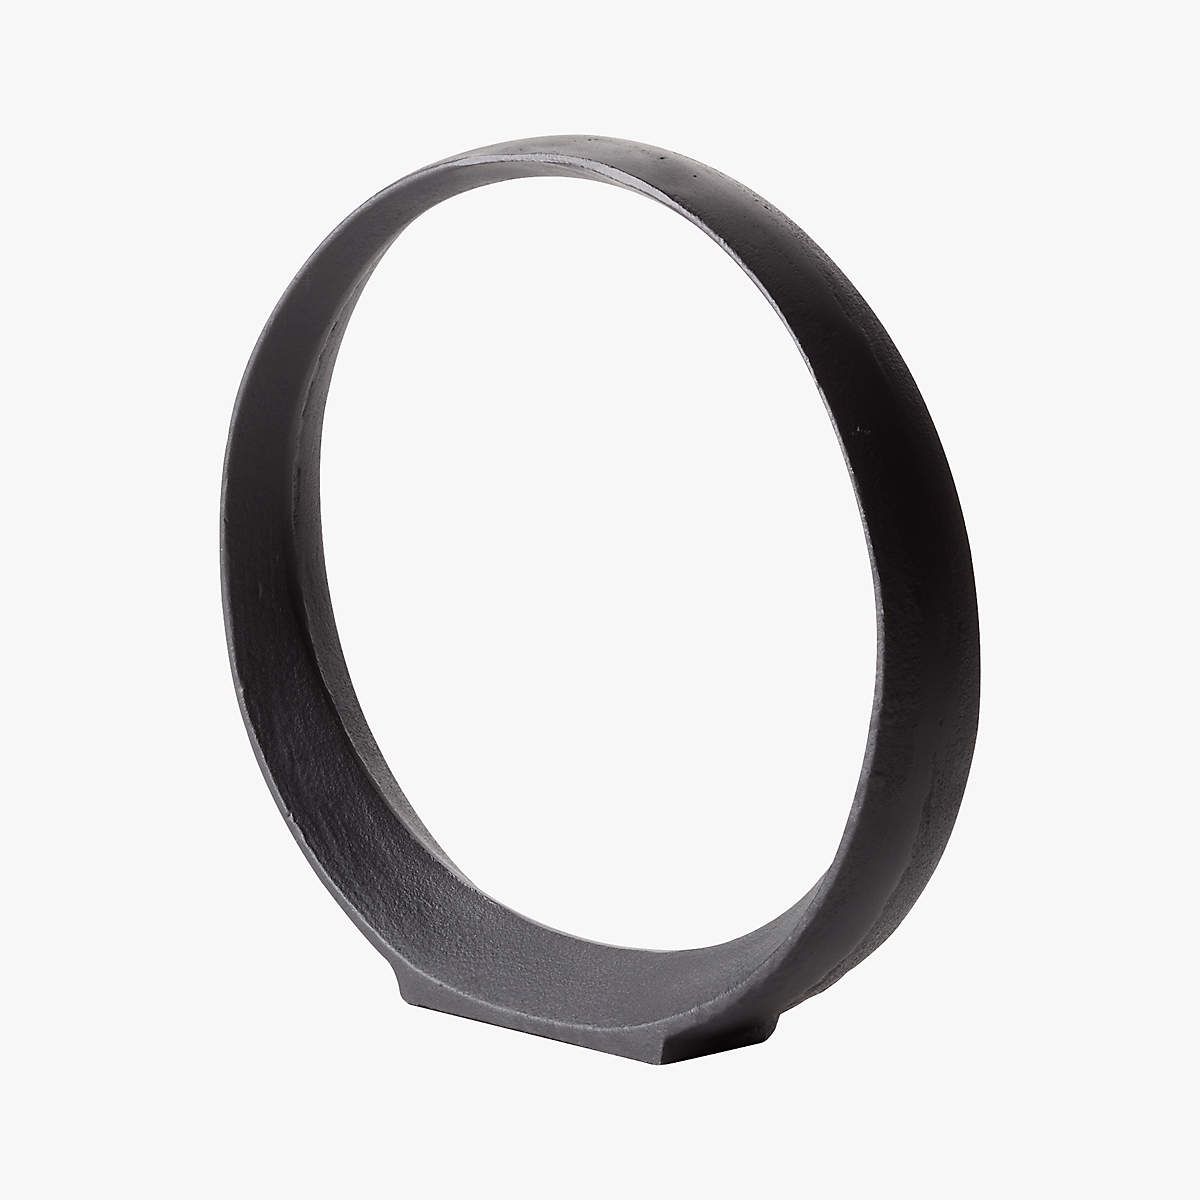 Small Metal Ring Sculpture - Image 1